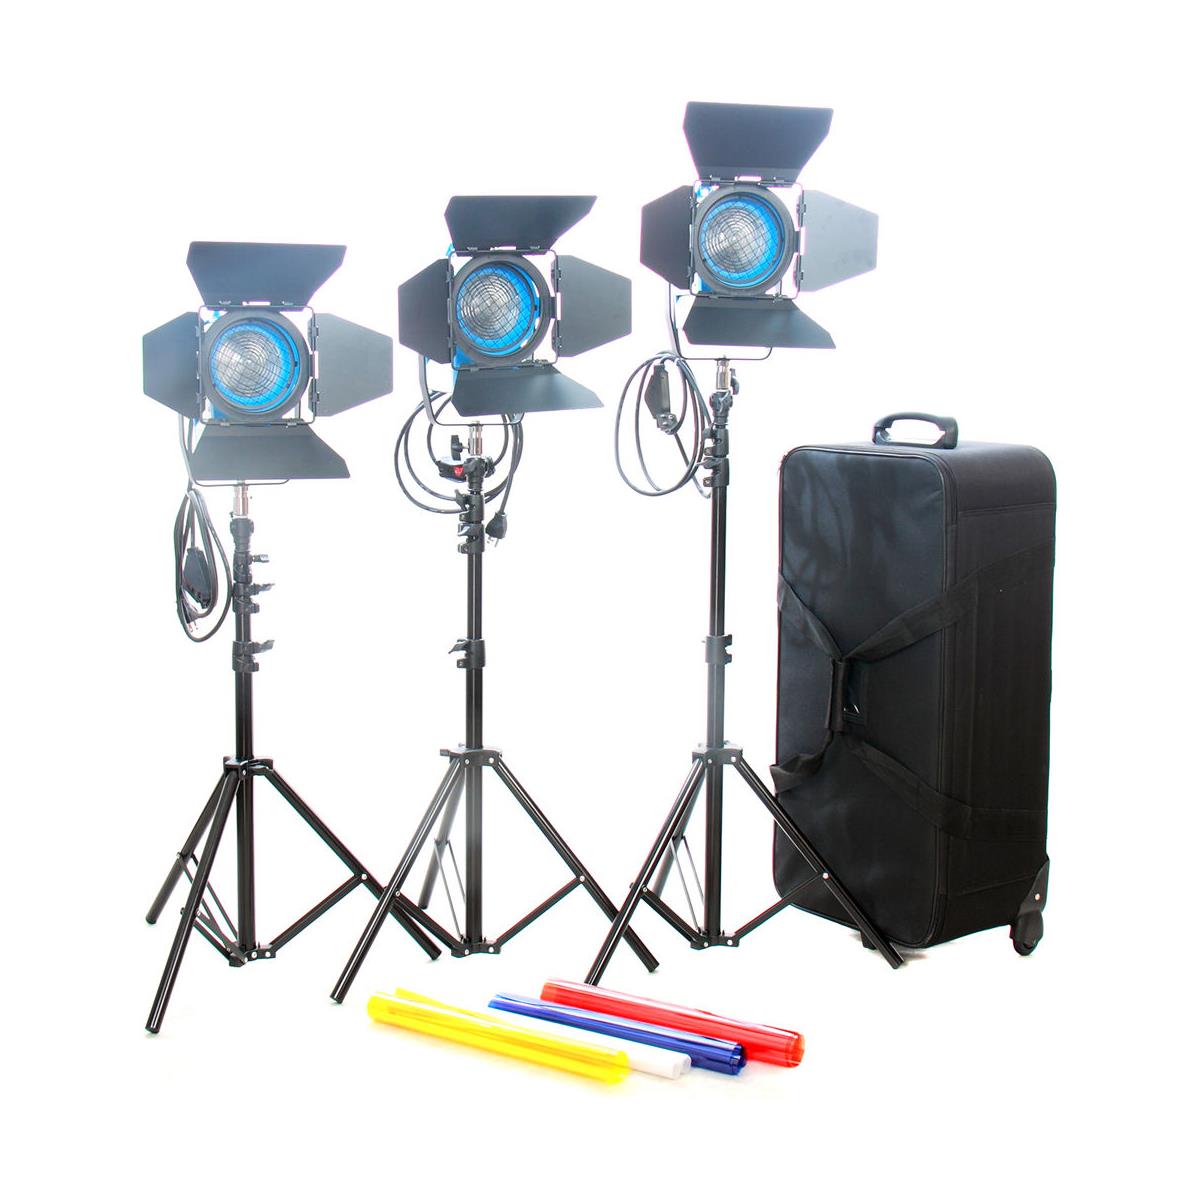 Image of Came-TV 3x 650W Fresnel Tungsten Continuous Spot Video Studio Lights